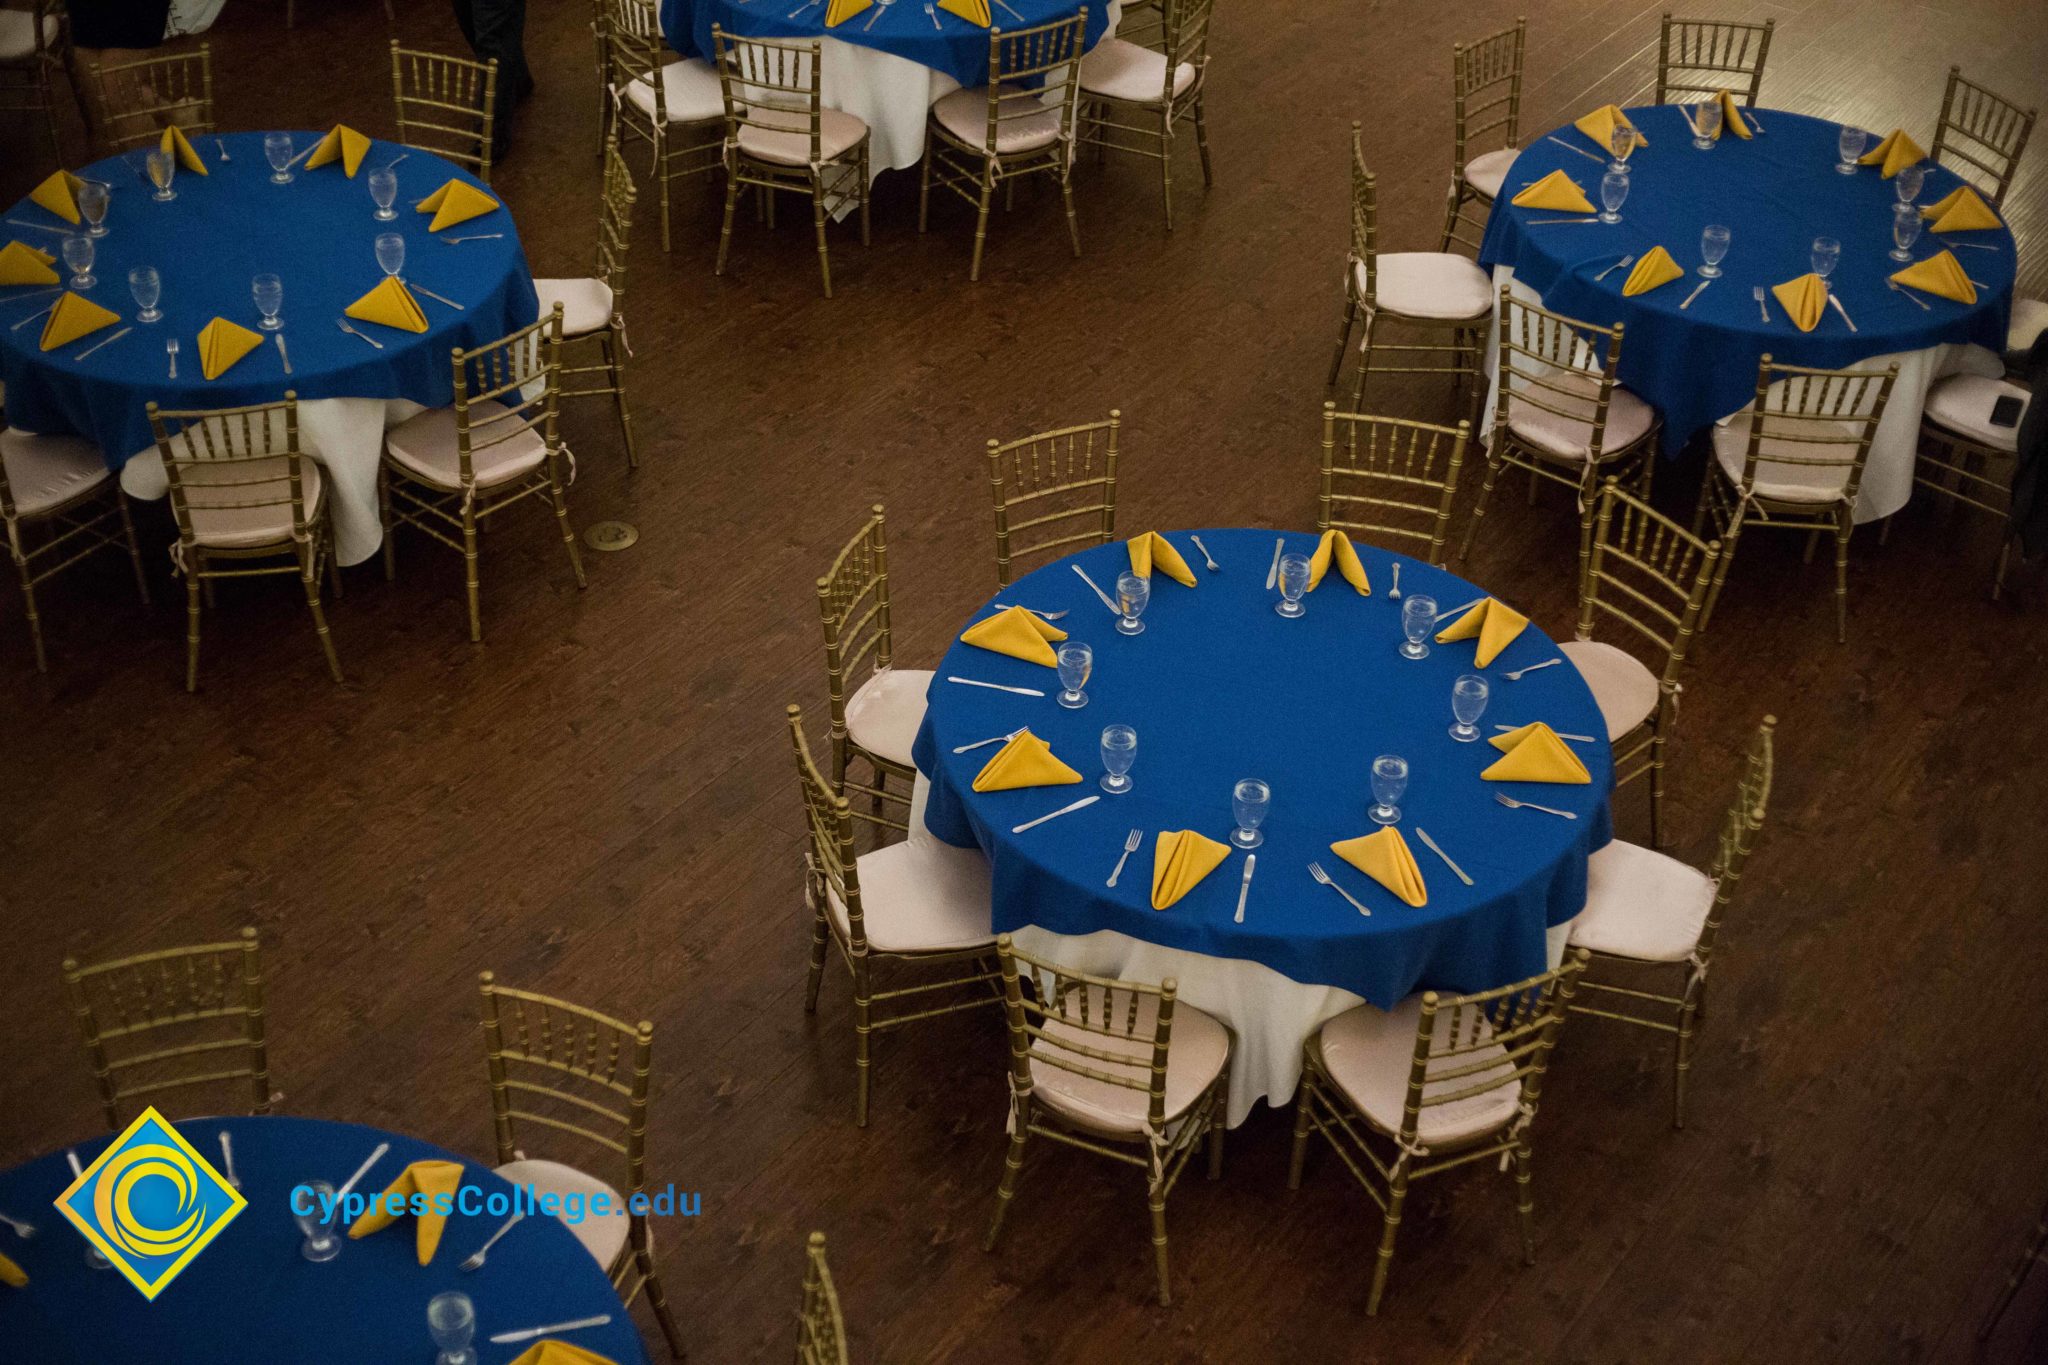 Tables at Associated Students banquet